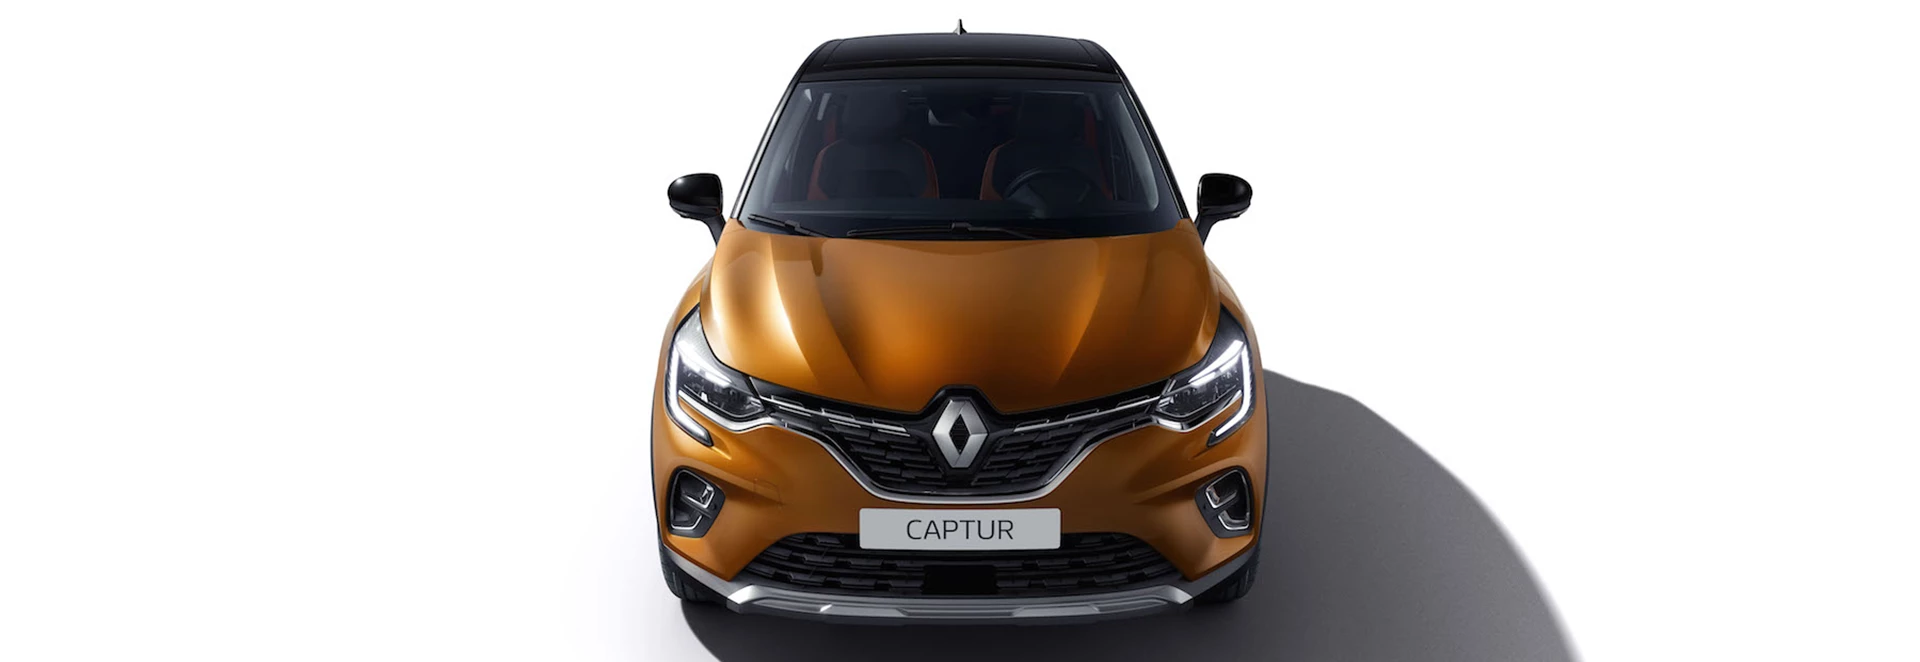 New Renault Captur crossover unveiled with plug-in hybrid tech coming